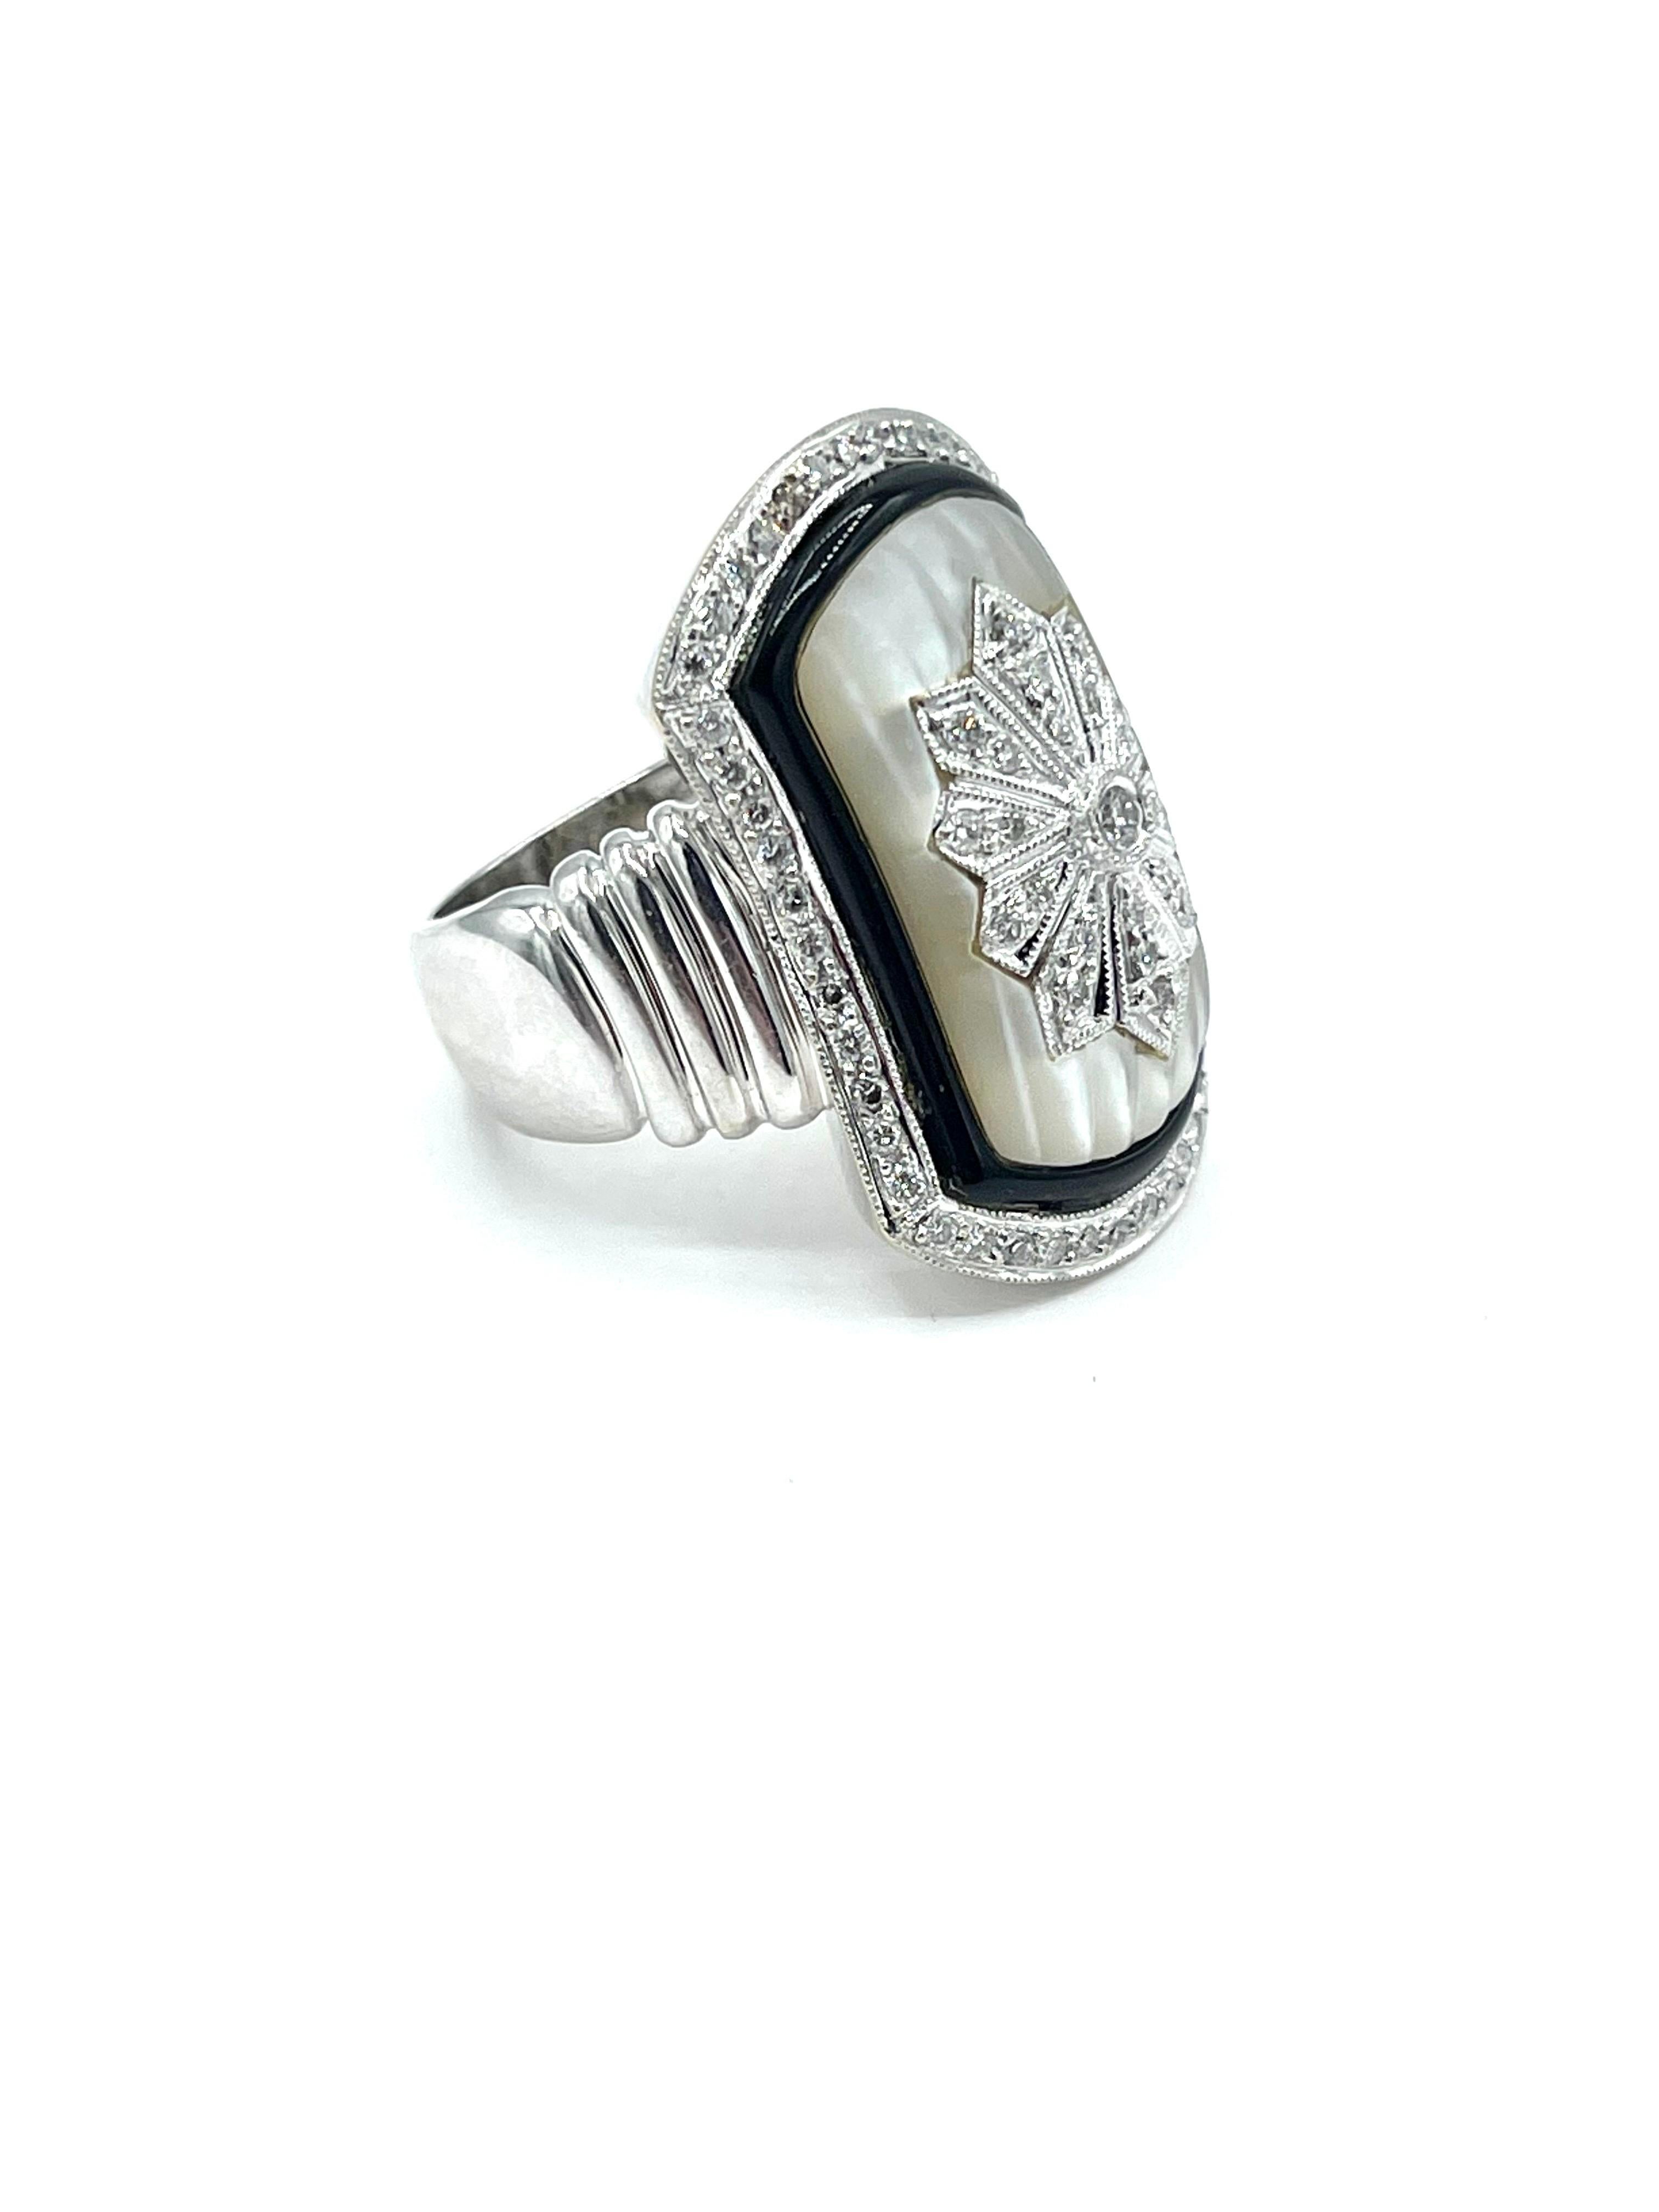 Diamond Mother of Pearl and Onyx 18K White Gold Cocktail Ring In Excellent Condition For Sale In Chevy Chase, MD